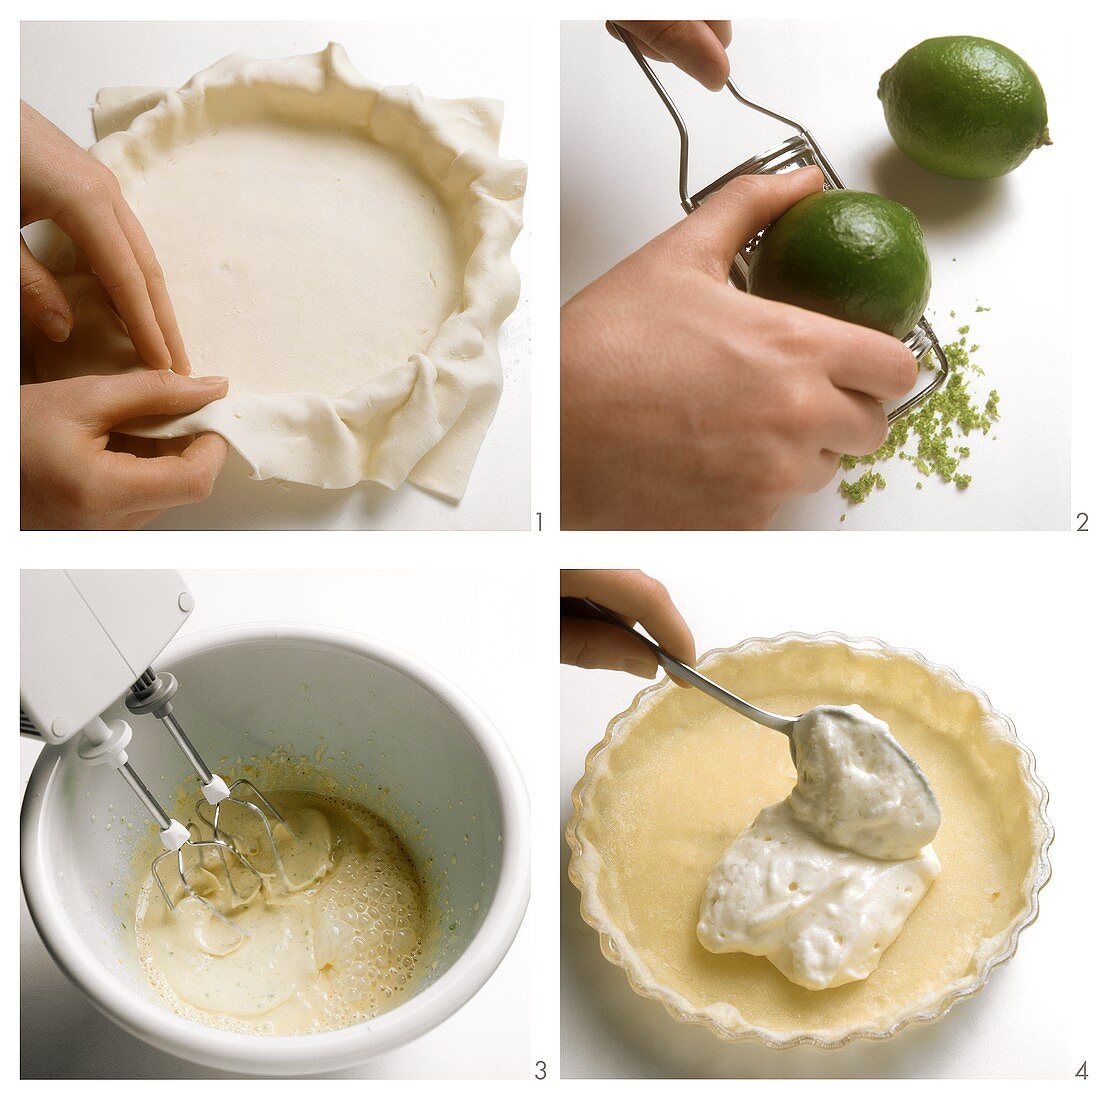 Baking lime pie